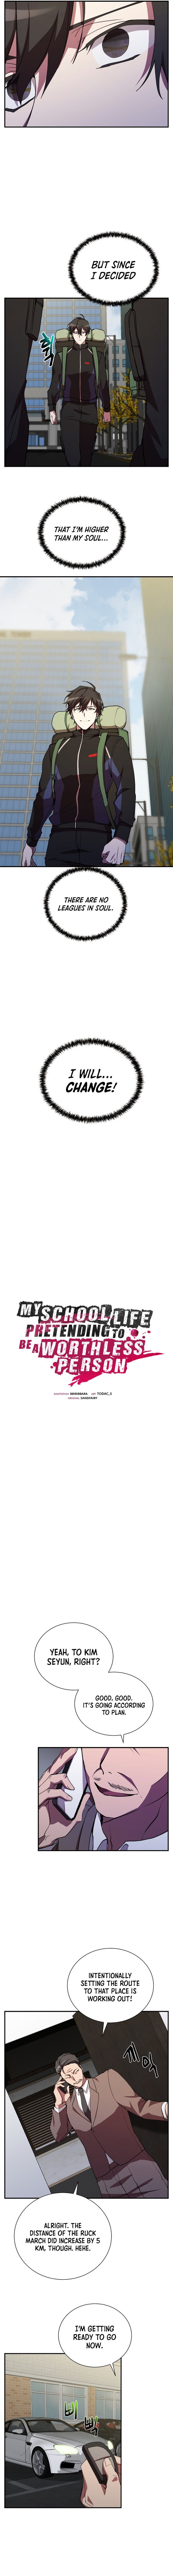 My School Life Pretending To Be a Worthless Person - Chapter 30 Page 5